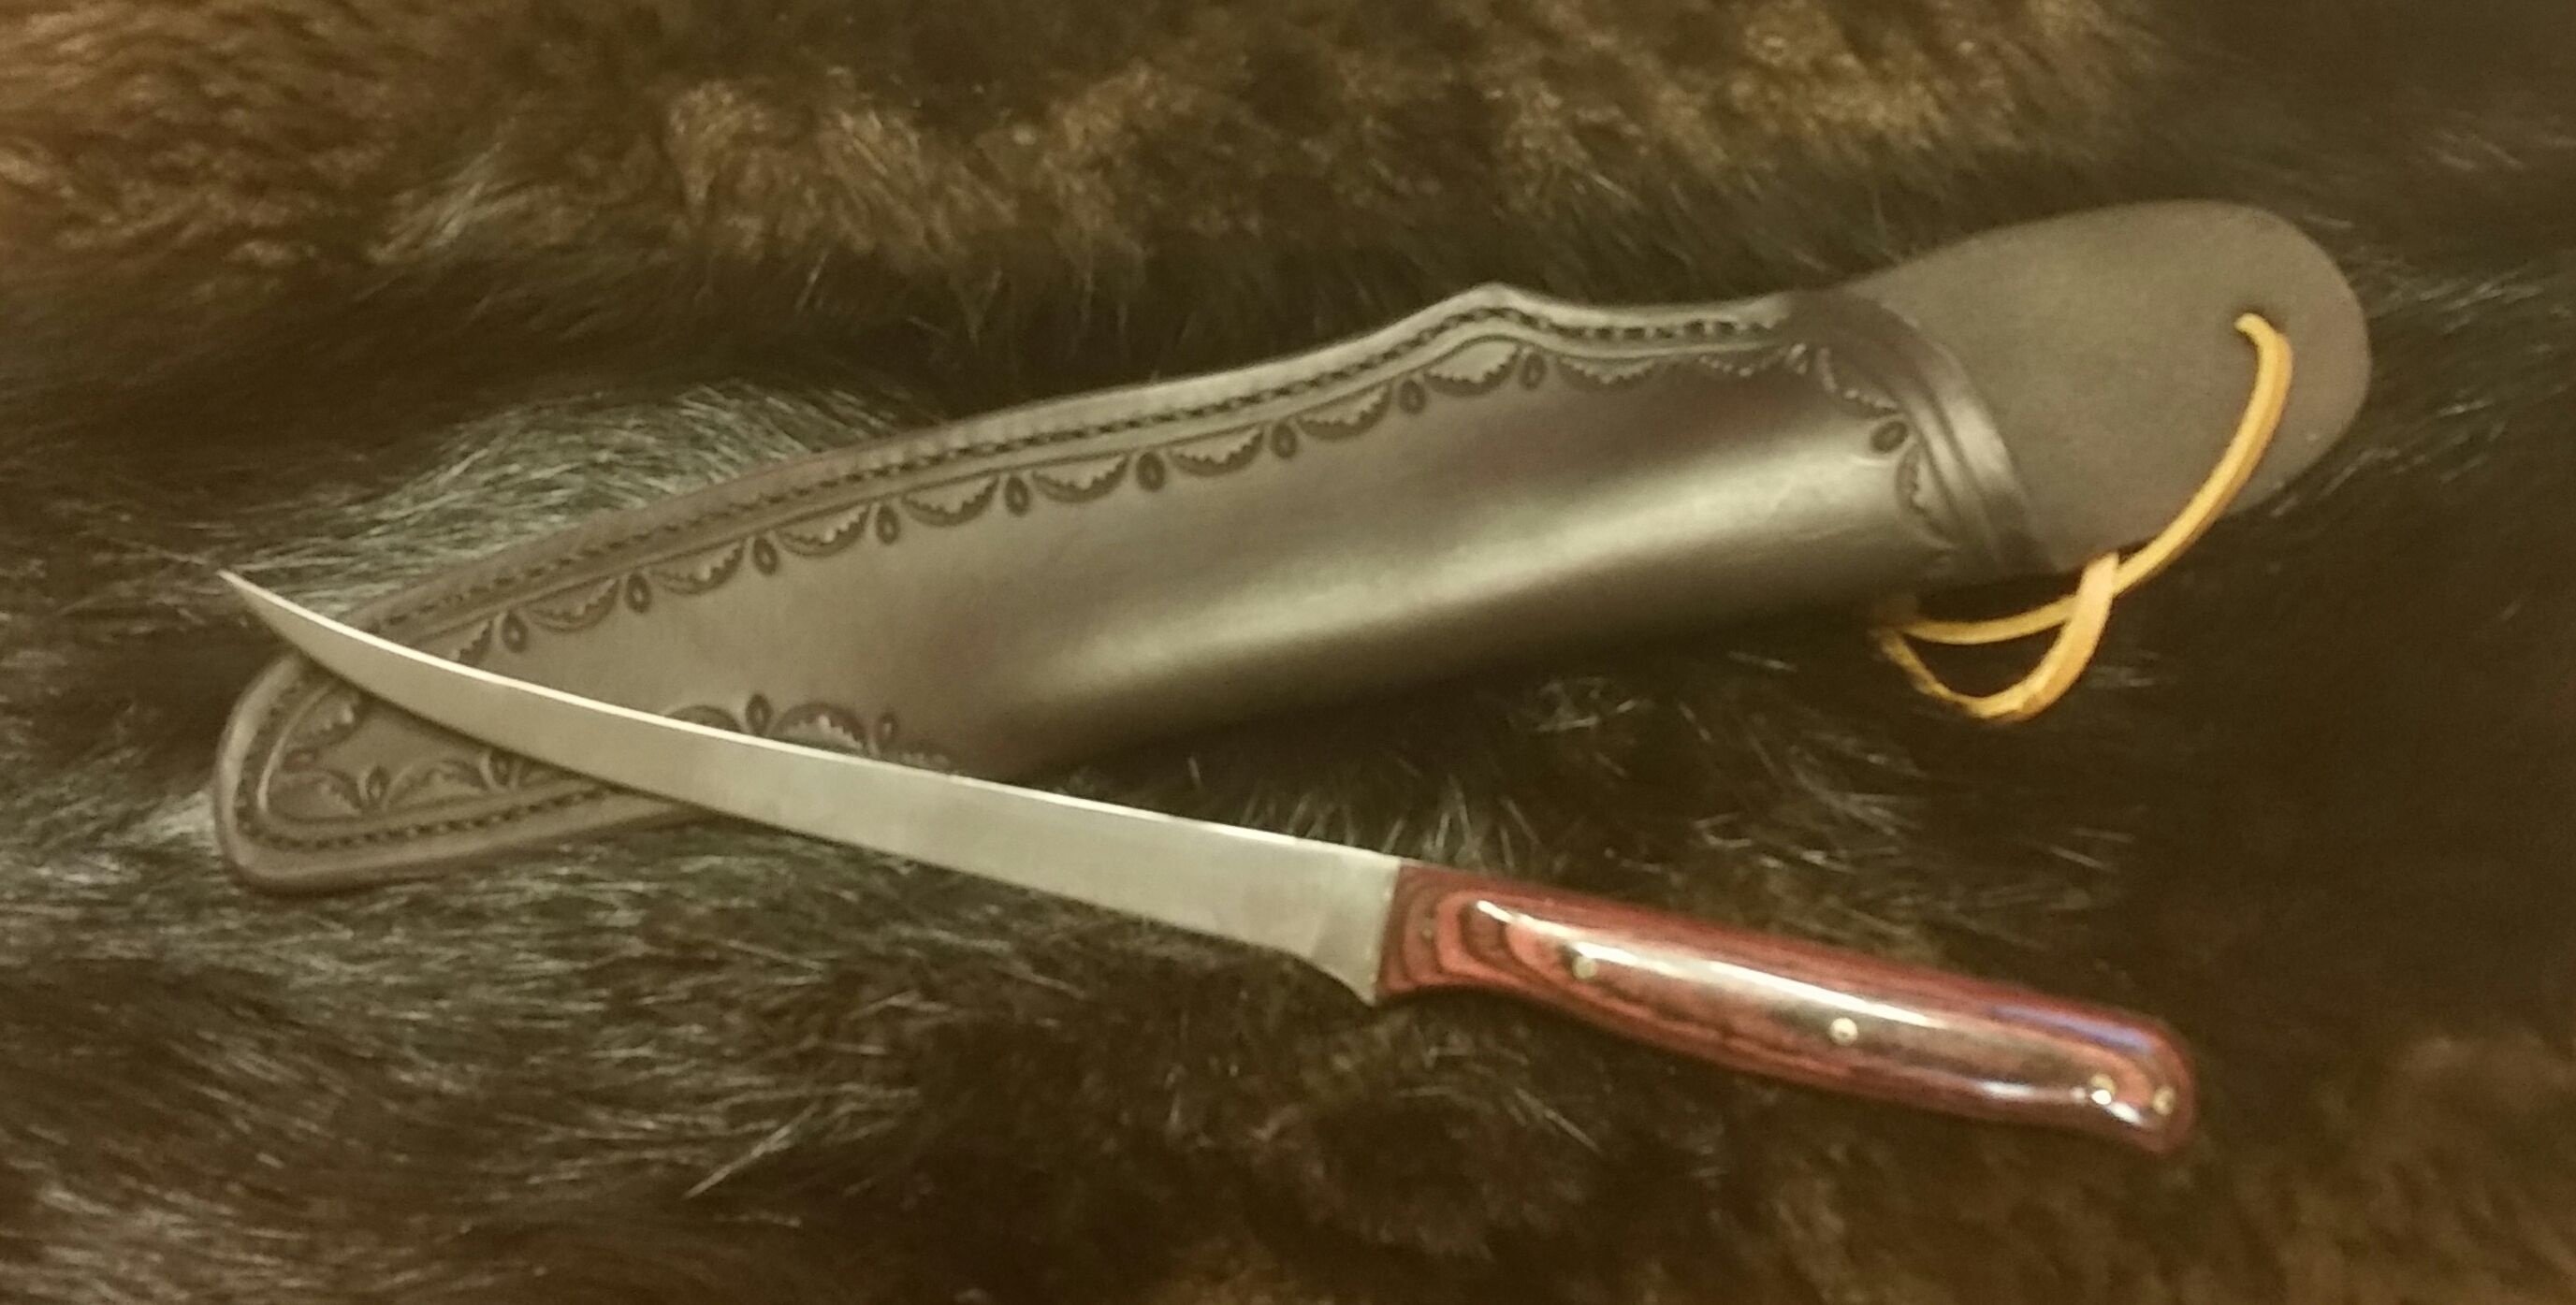 Short Filet Knife with Hand Tooled, Hand Stitched Leather Sheath...  $110.00